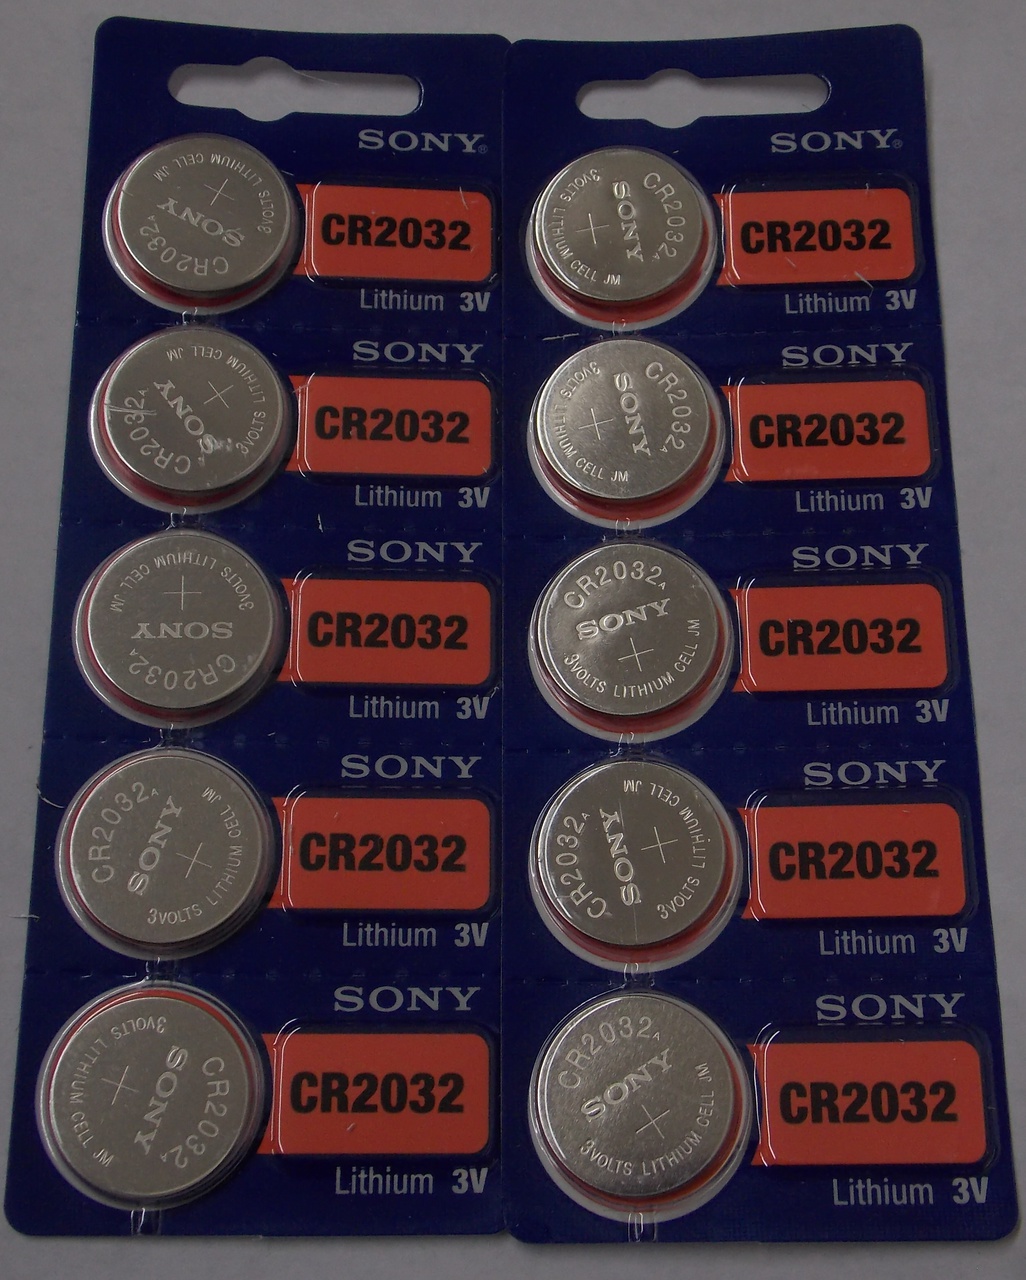 Sony CR2032 3V Lithium Coin Battery - 10 Pack + FREE SHIPPING